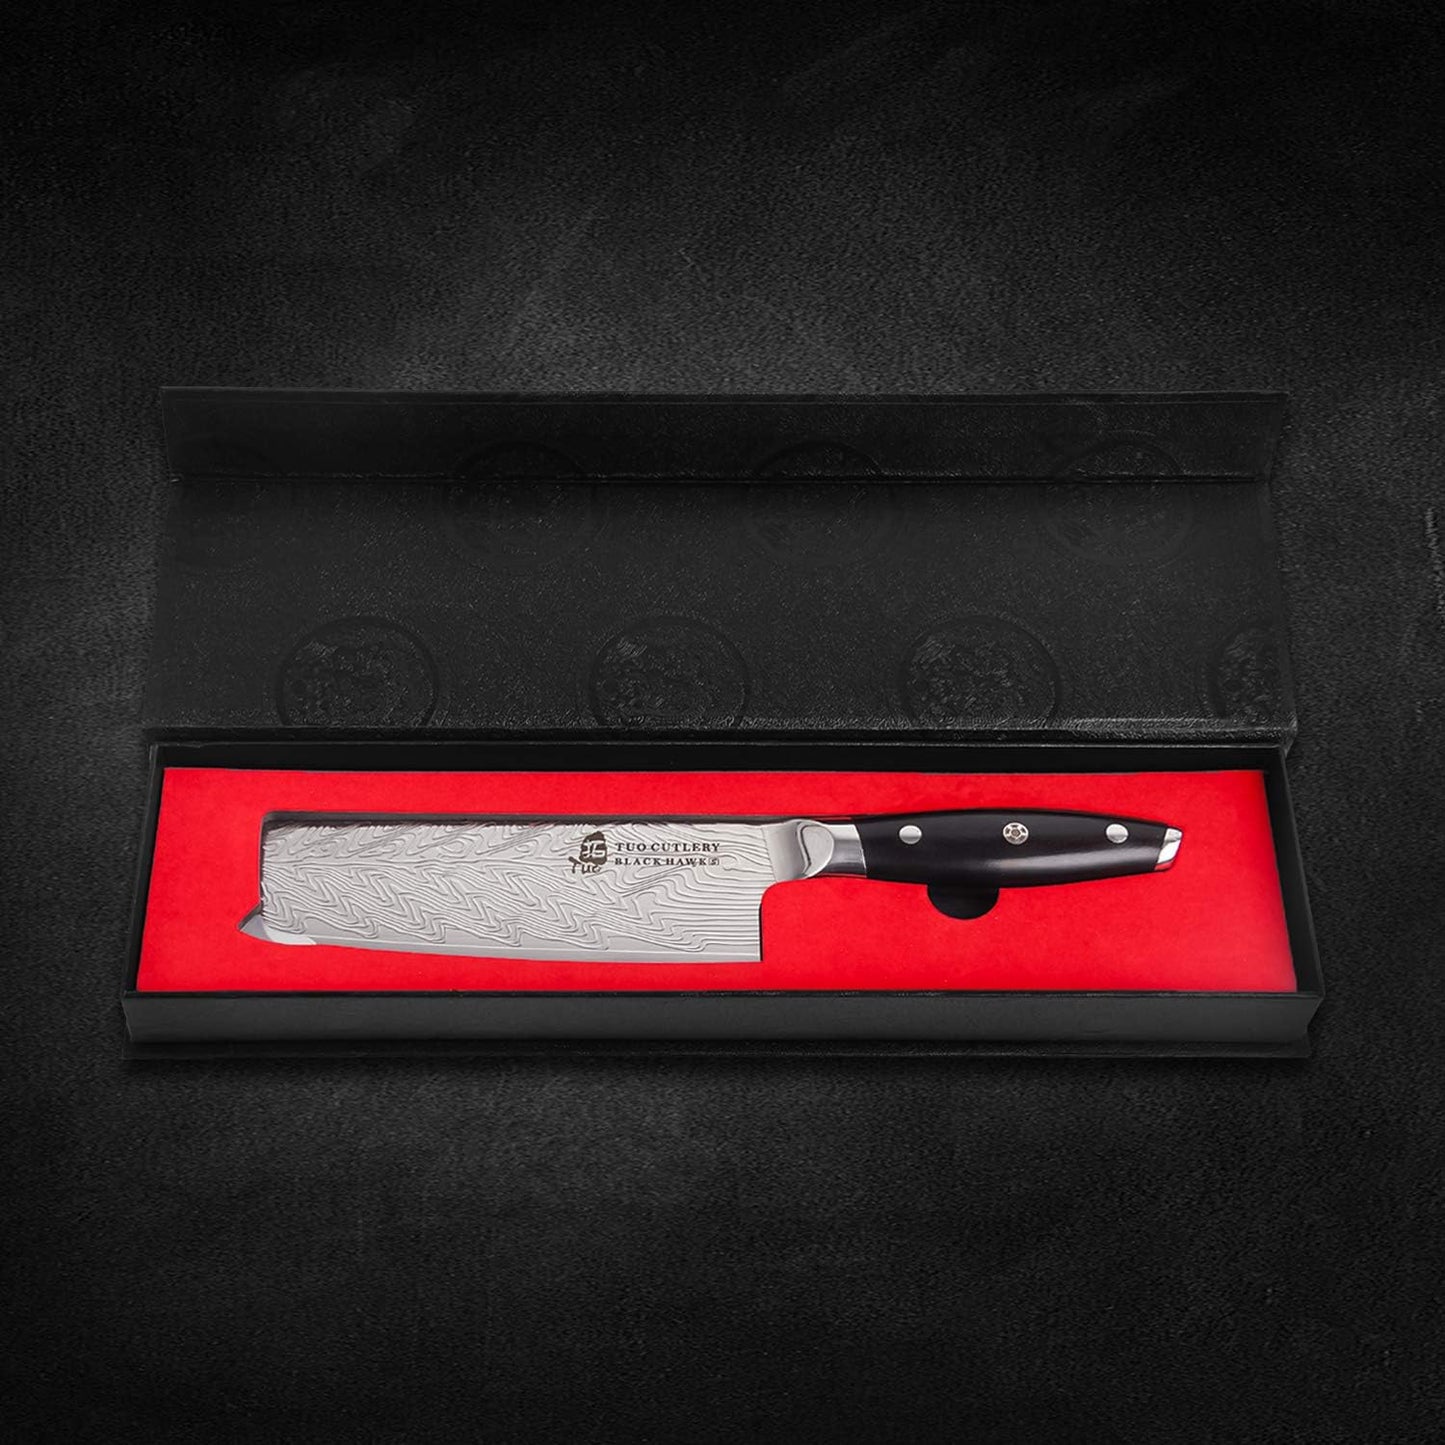 KD Nakiri Japanese Knife 6.5-inch Stainless Steel Kitchen Knife with Gift Box